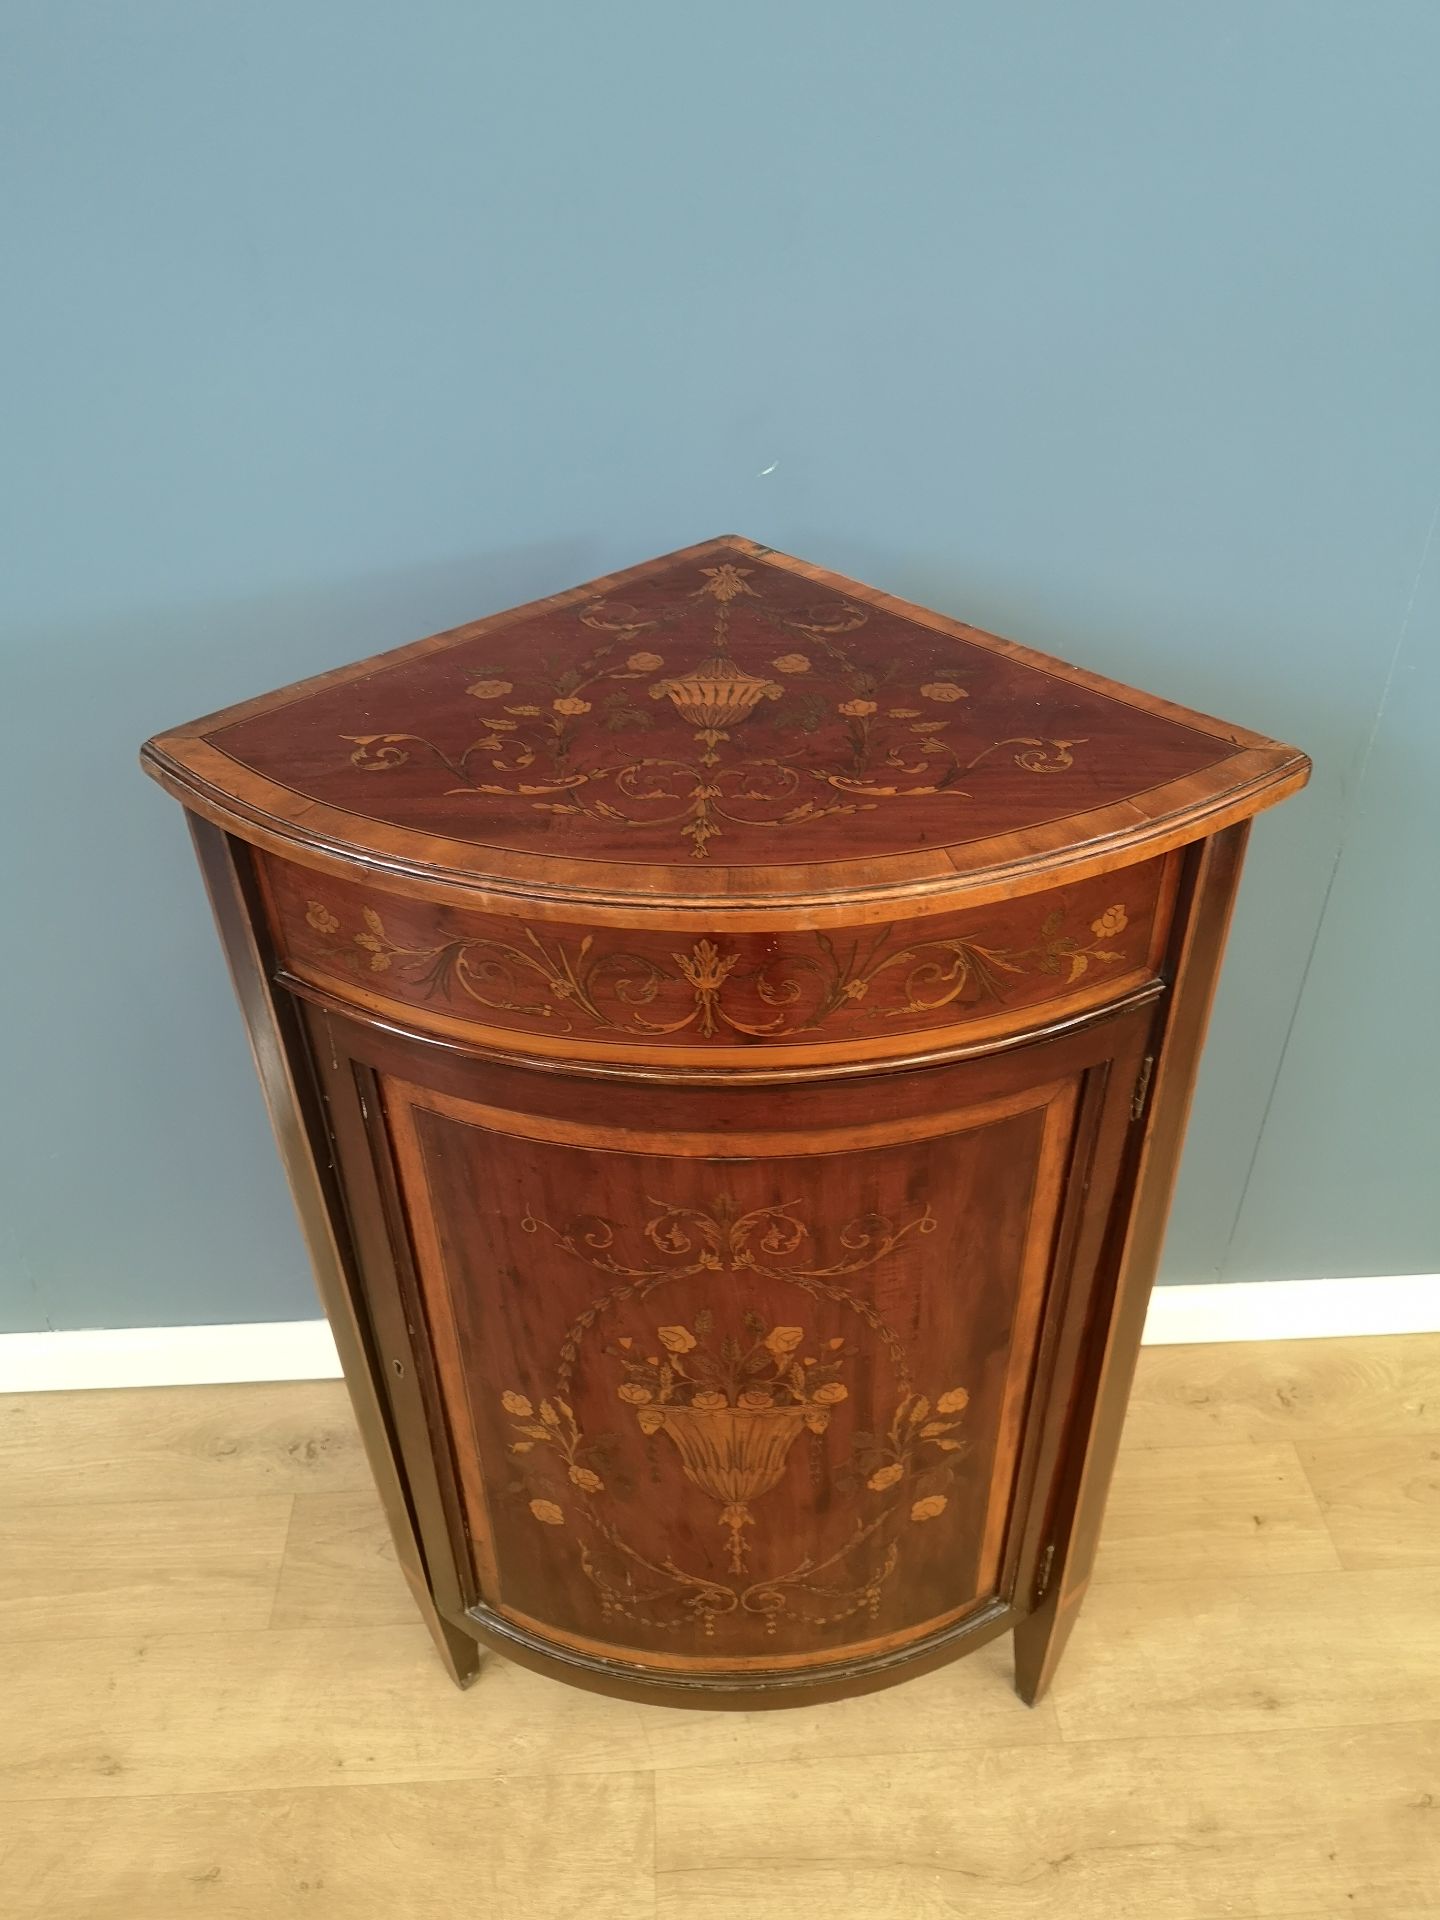 Mahogany bow fronted corner cabinet - Image 2 of 5